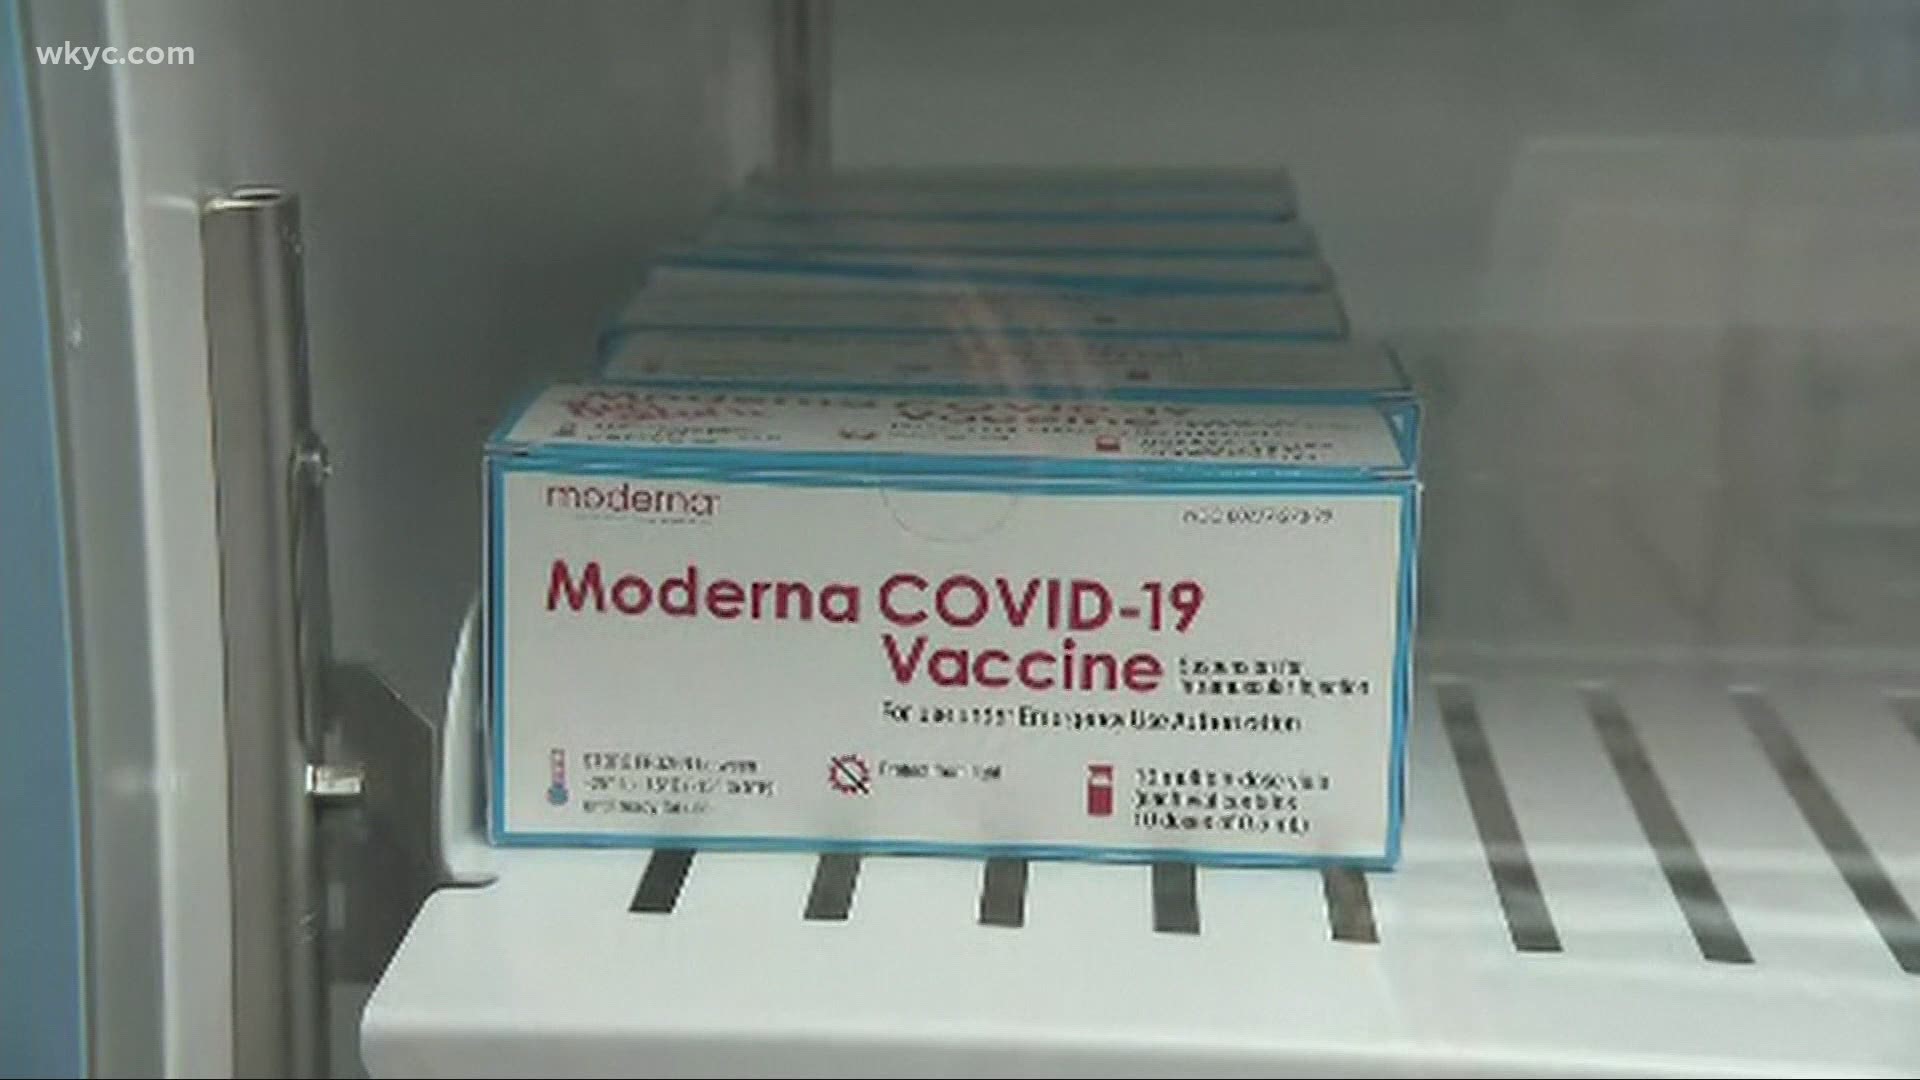 The company is the second drugmaker in the U.S. to begin applying for full FDA approval for its COVID-19 vaccine.